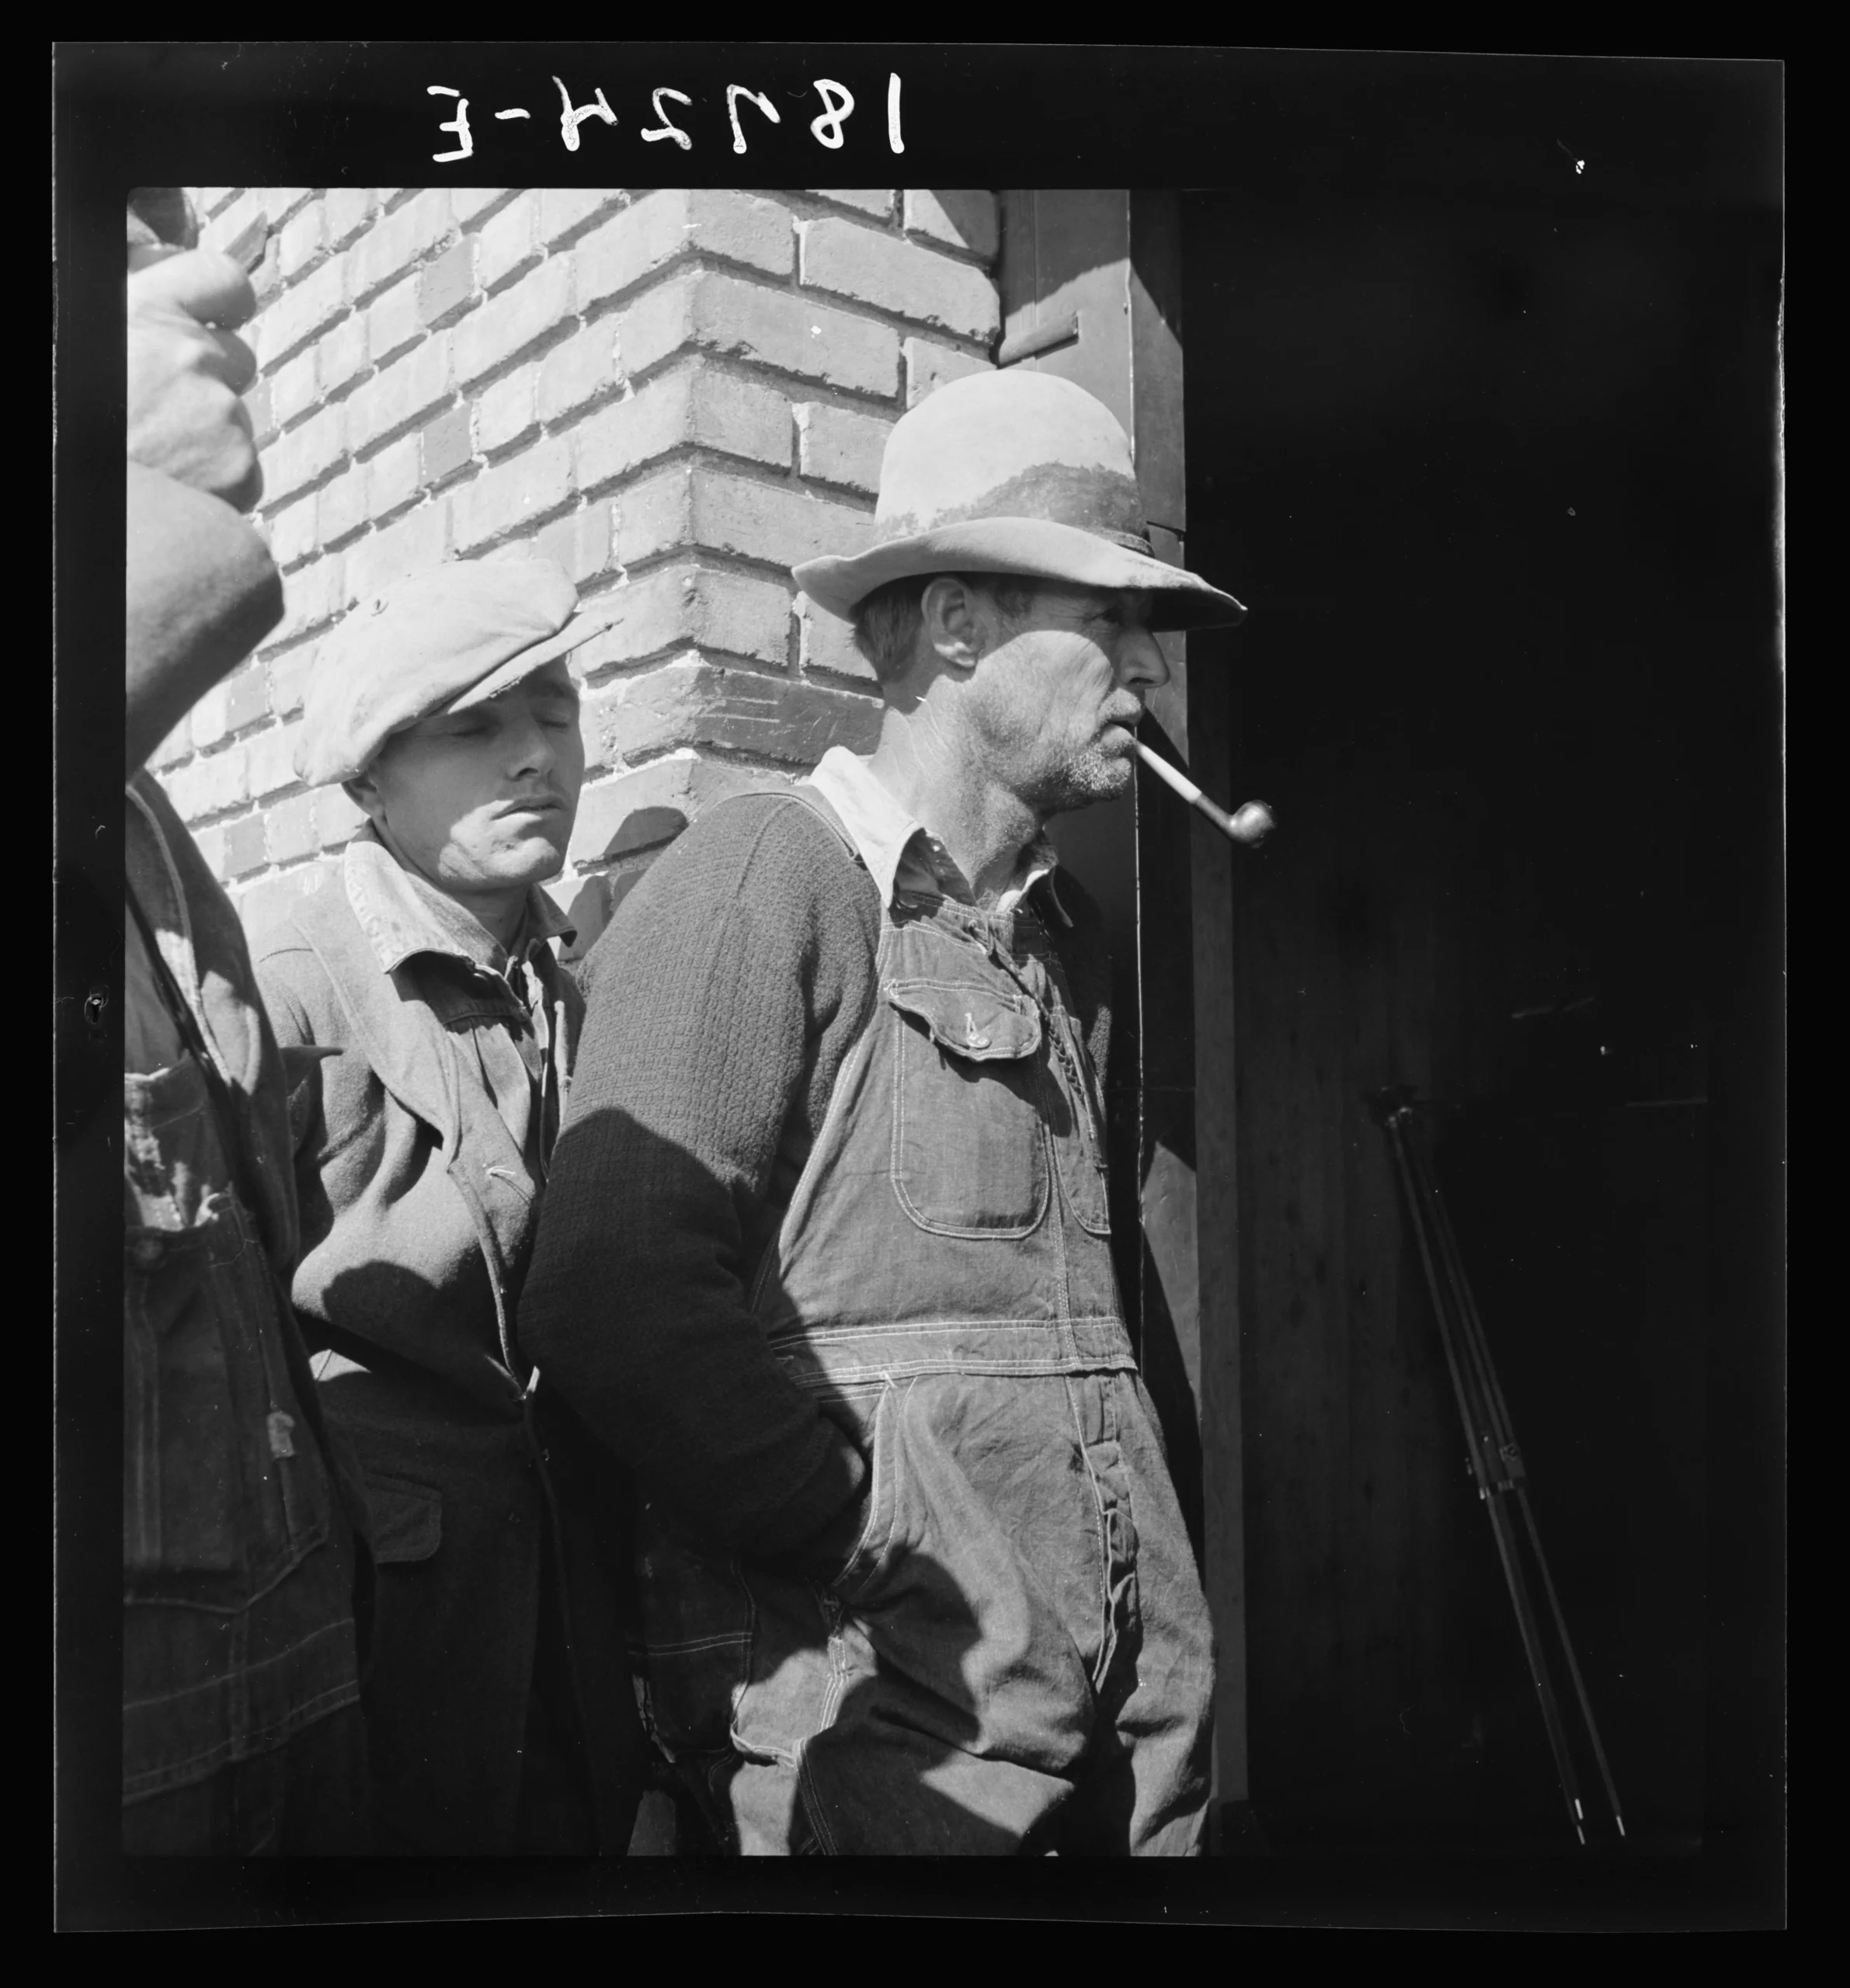 Photograph of three men standing outside of a darkened doorway on a brick building. The primary subject of the photo has a pipe in his mouth, a rumpled hat on his head, and is wearing overalls over a sweater and collared shirt combo.